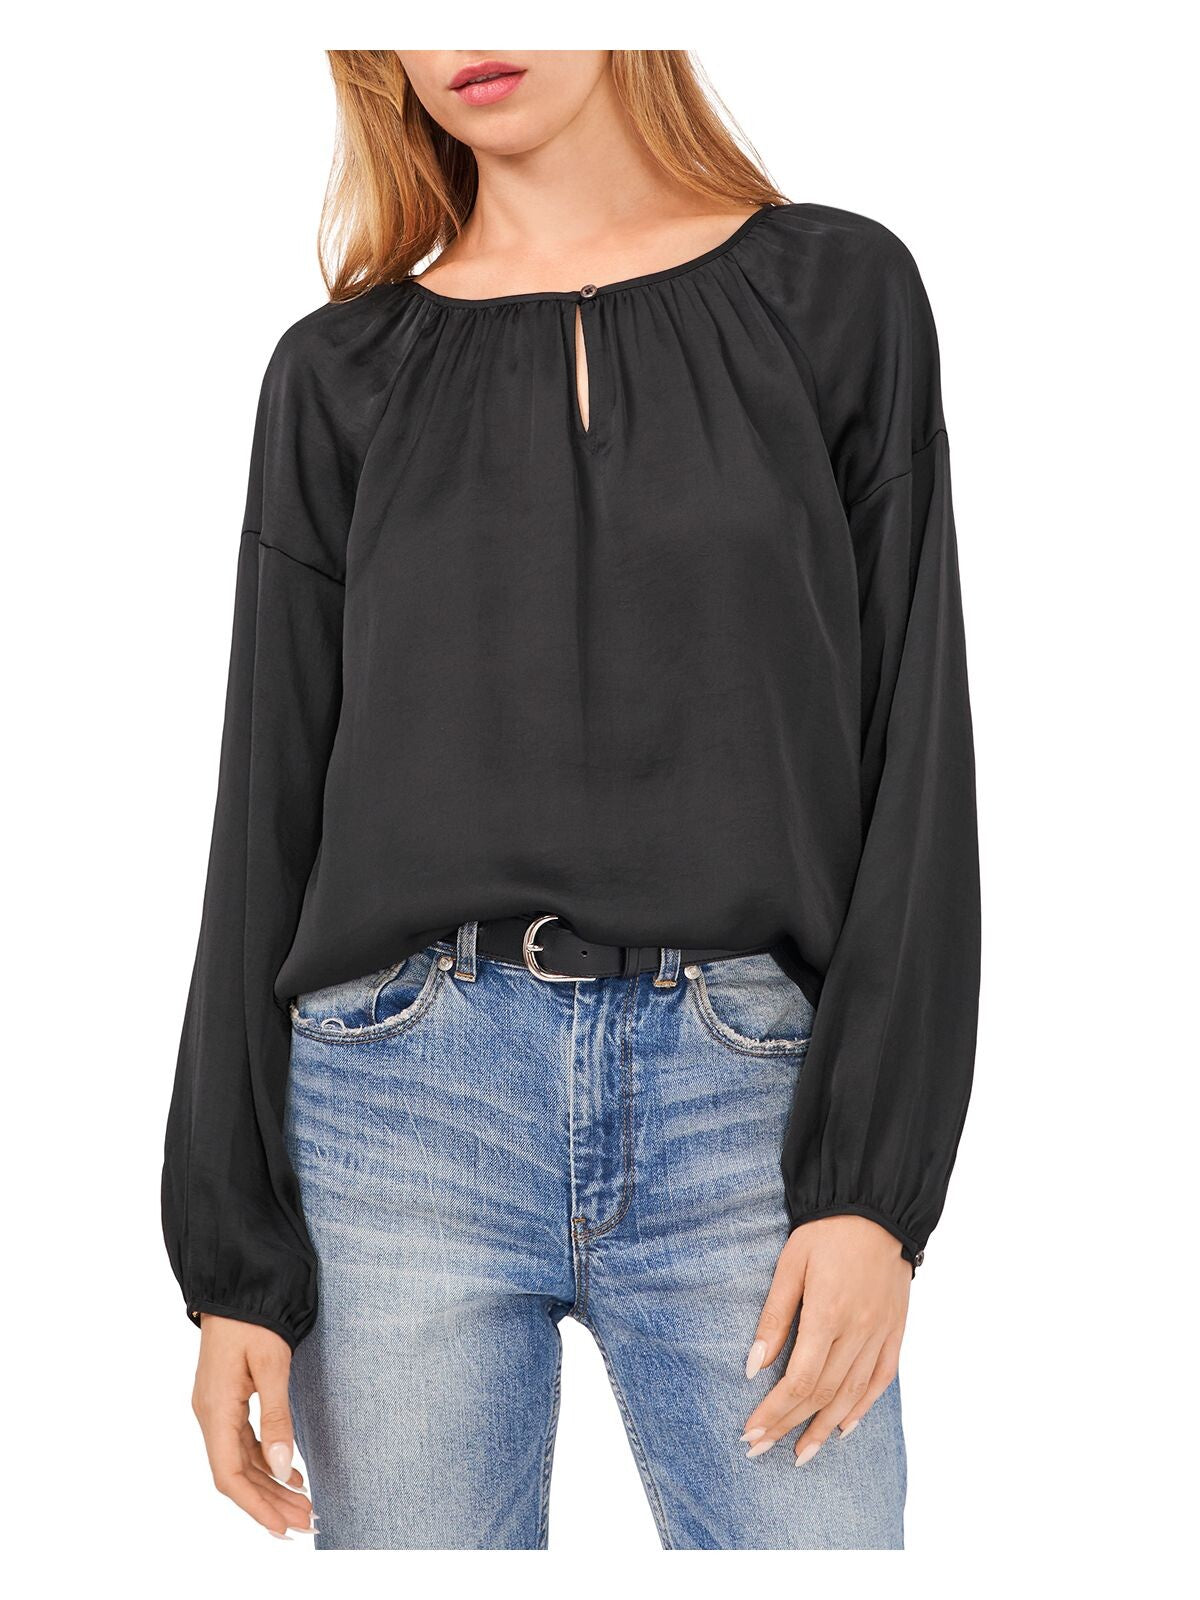 VINCE CAMUTO Womens Black Gathered Curved Hem Long Sleeve Keyhole Wear To Work Peasant Top XS